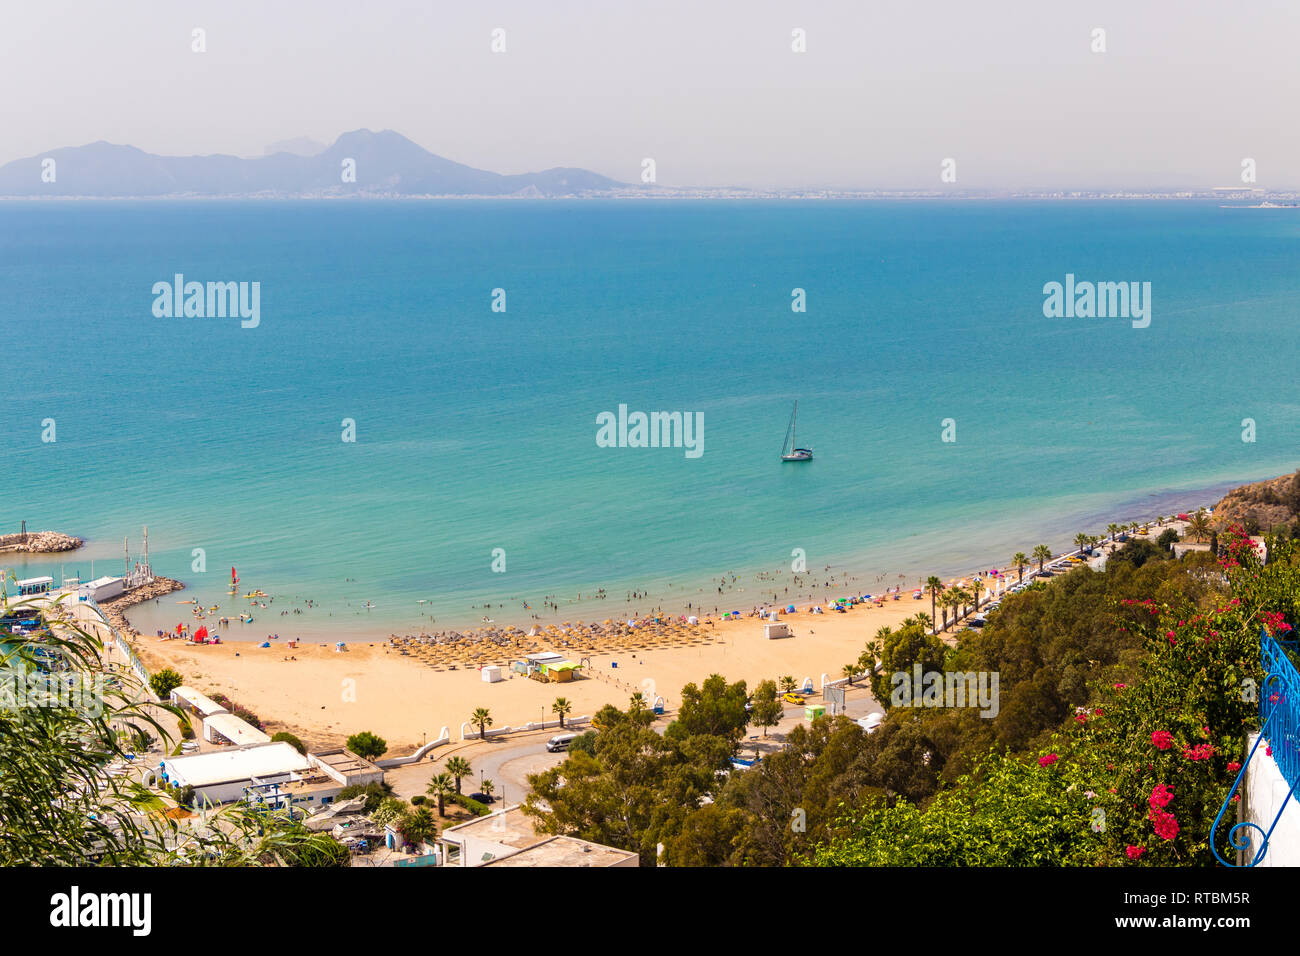 The beach in Sidi Bou Said on the Mediterranean sea. View from the hill in Tunisia Stock Photo